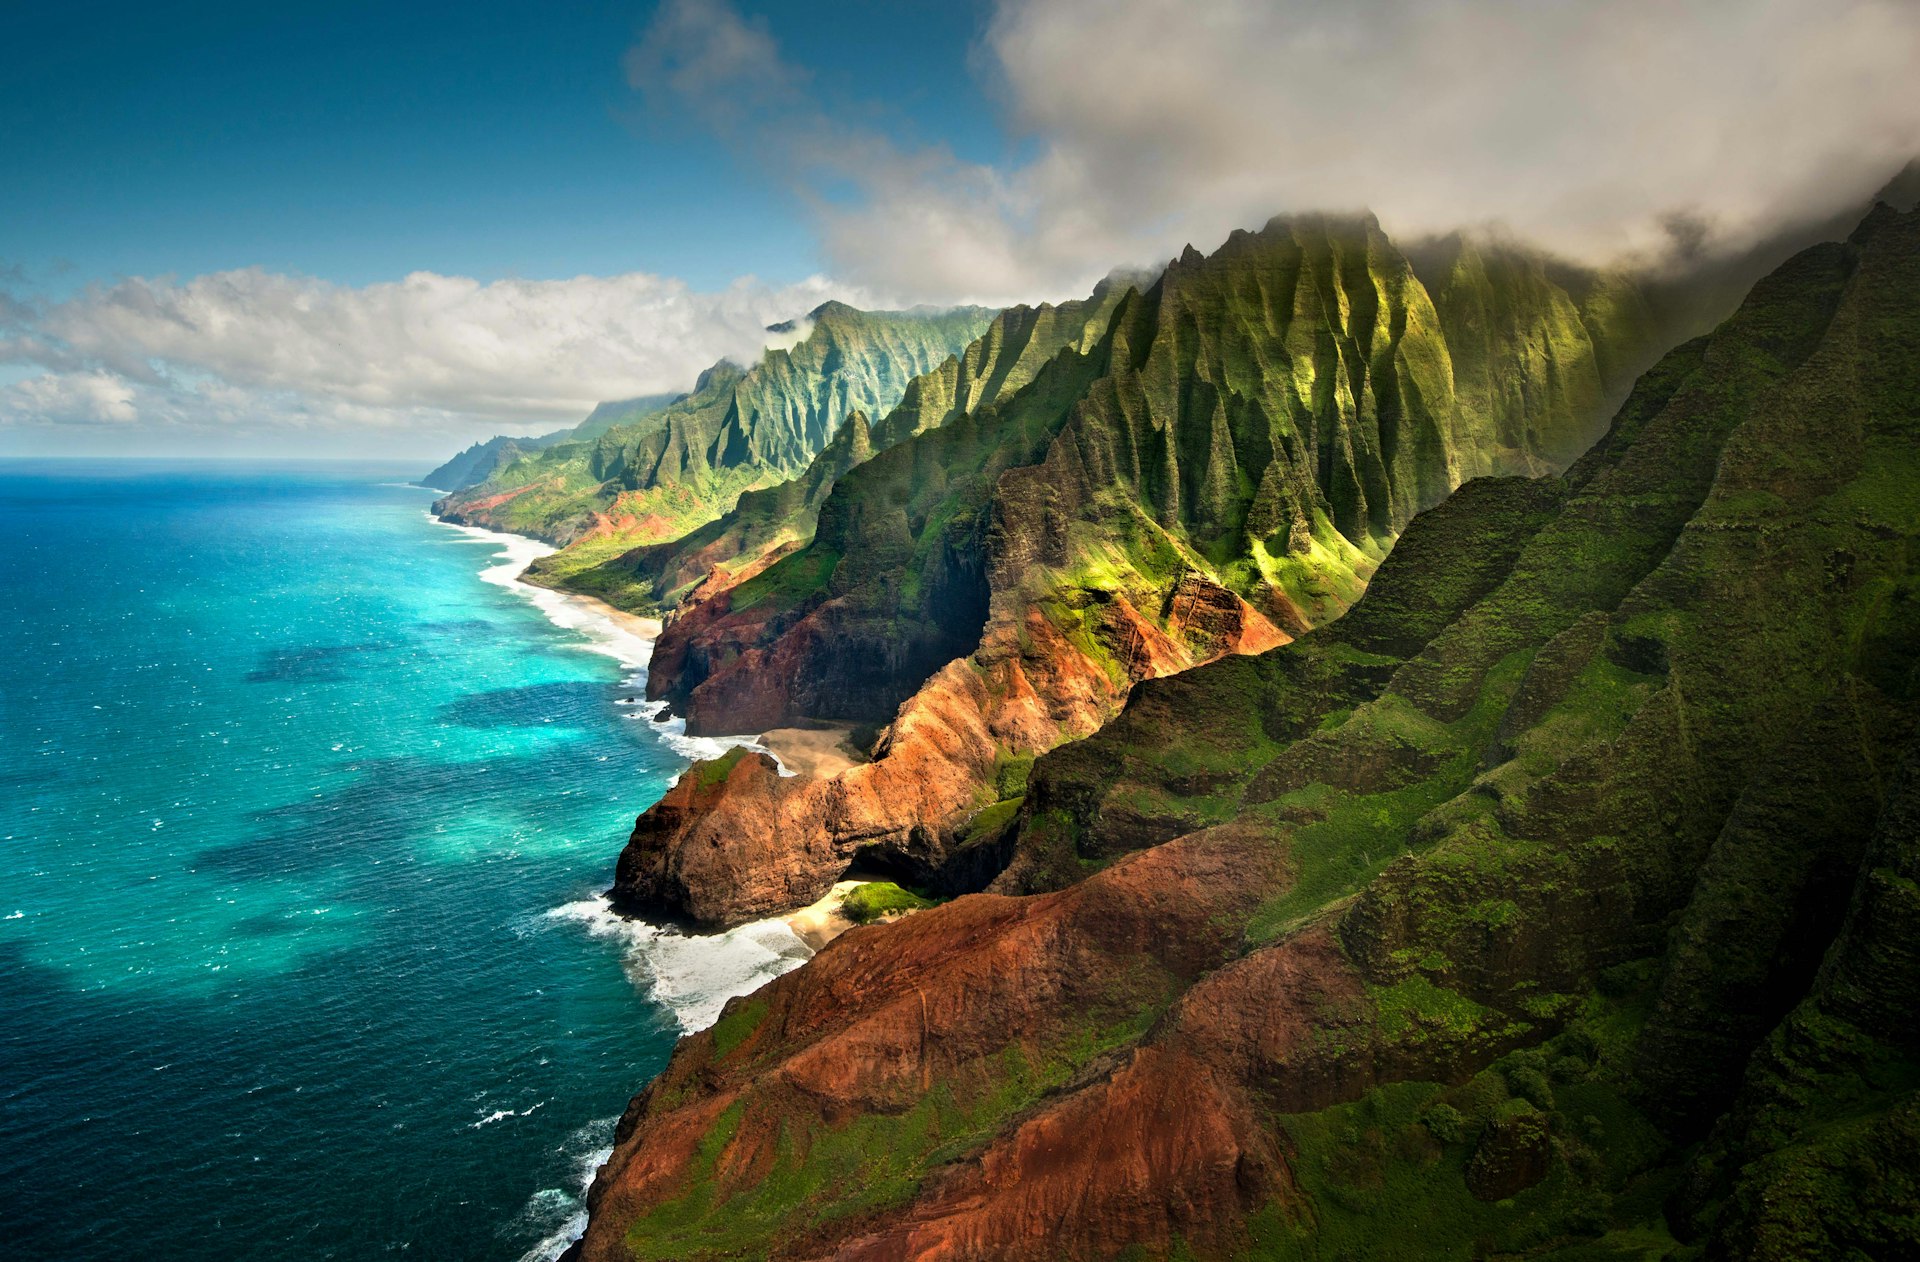 The rugged cliffs of the Na Pali Coast. Image by Cultura RM/George Karbus Photography / Getty